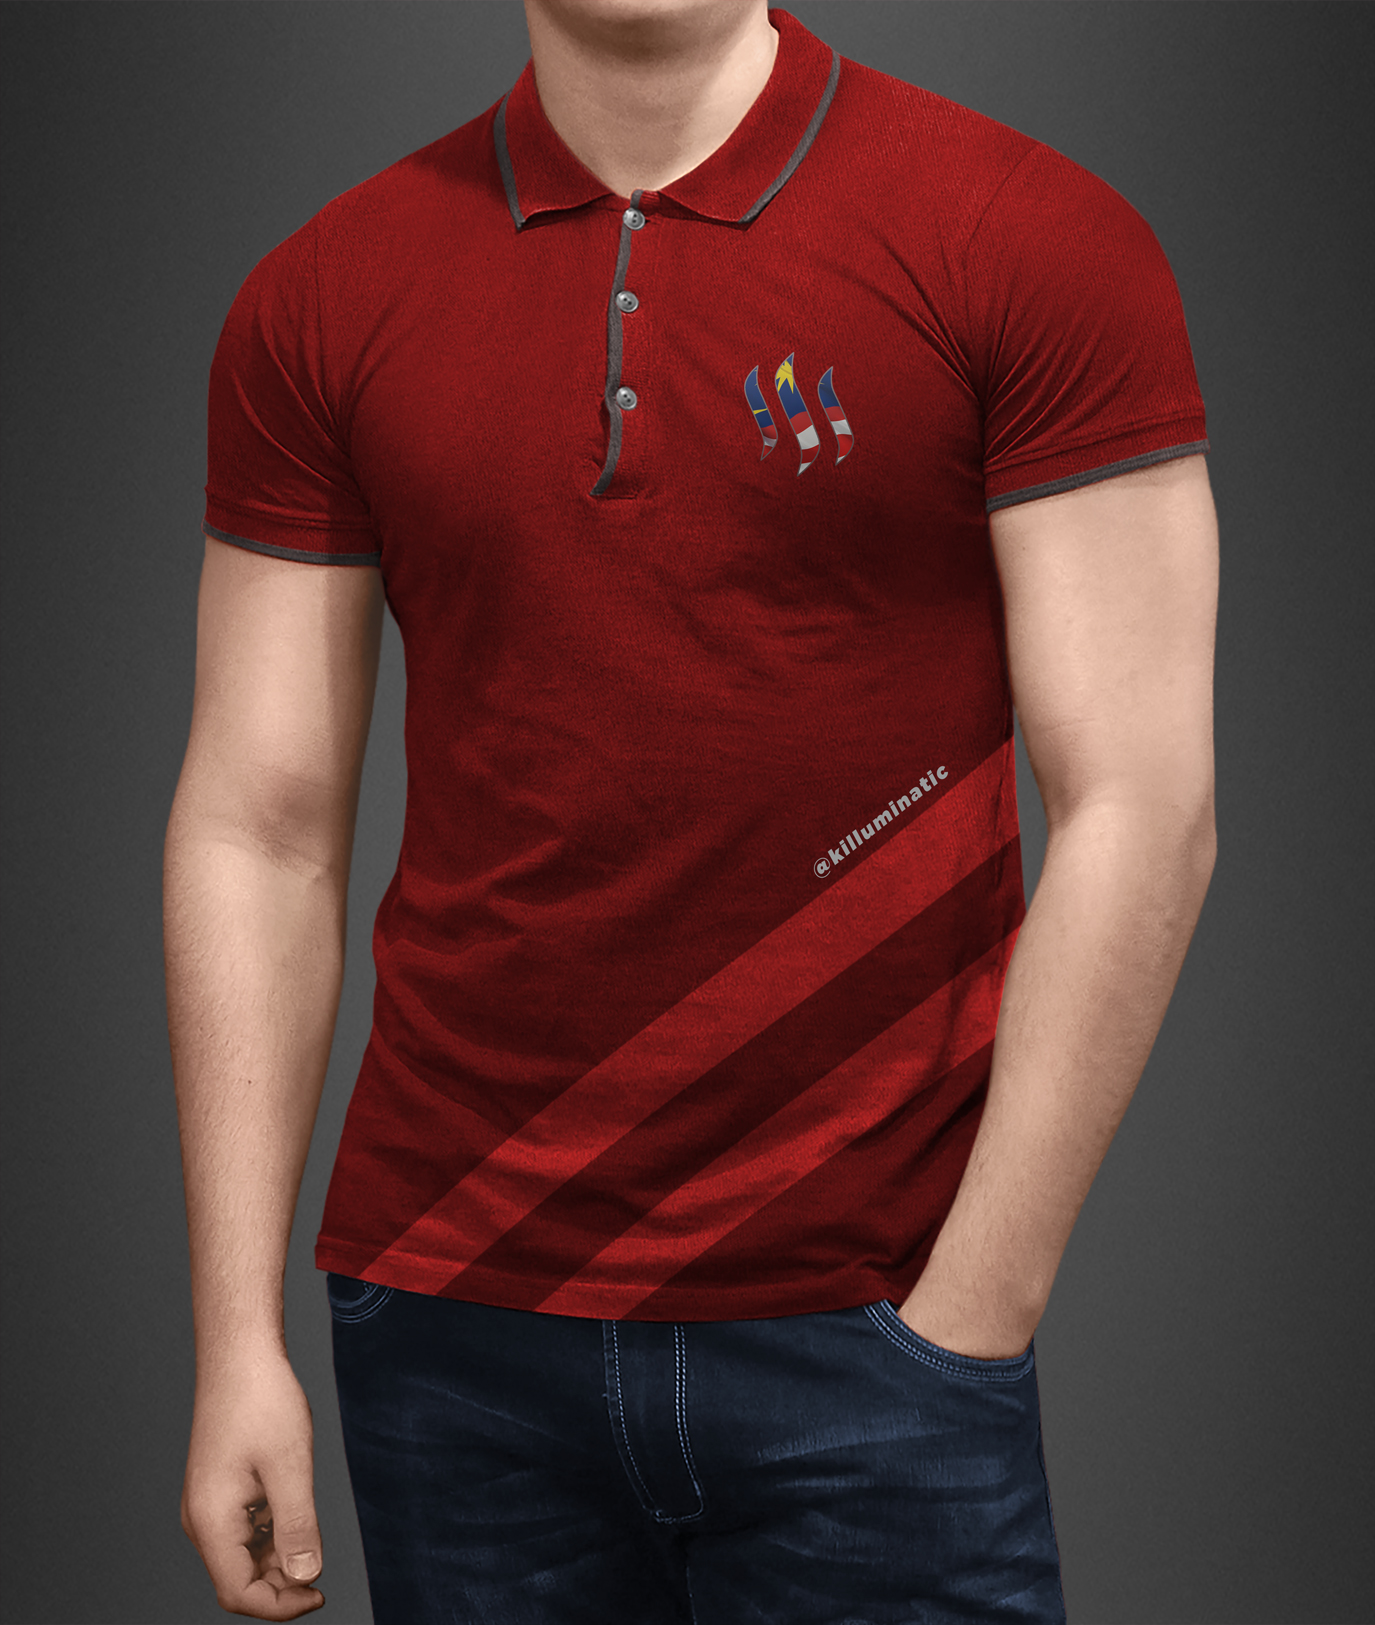 STM-POLO-FRONT-RED.jpg